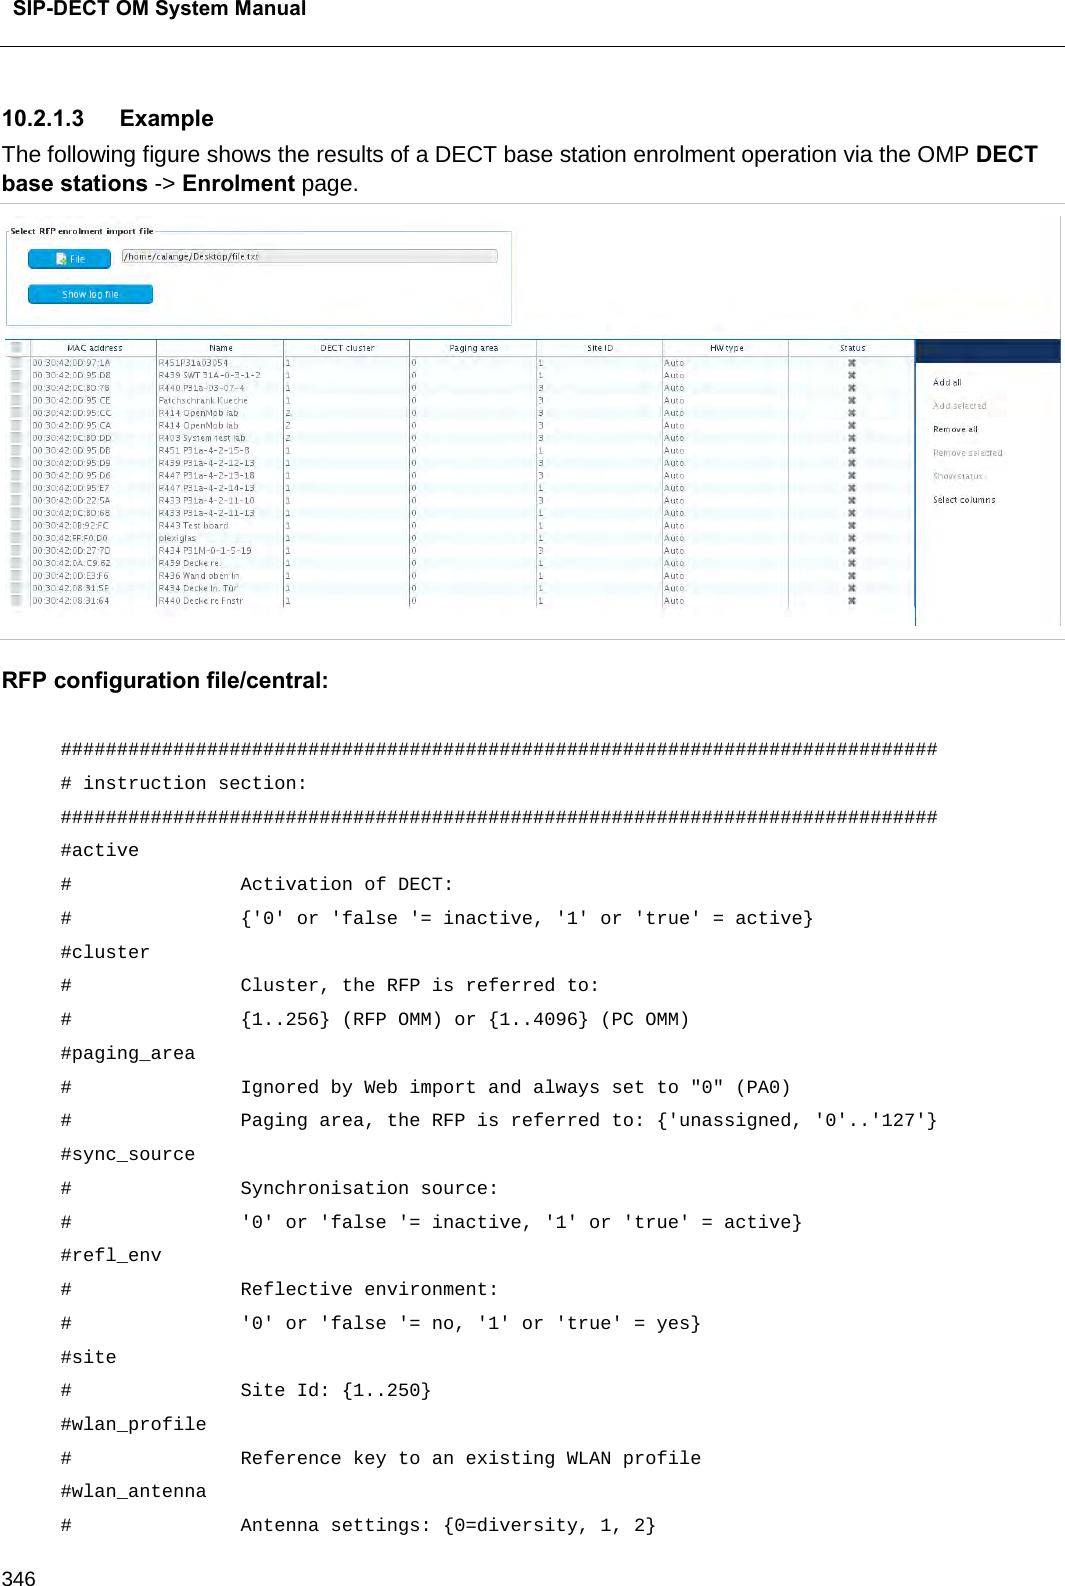  SIP-DECT OM System Manual    346 10.2.1.3 Example The following figure shows the results of a DECT base station enrolment operation via the OMP DECT base stations -&gt; Enrolment page.  RFP configuration file/central:  ############################################################################## # instruction section:                                                         ############################################################################## #active  #               Activation of DECT: #               {&apos;0&apos; or &apos;false &apos;= inactive, &apos;1&apos; or &apos;true&apos; = active} #cluster #               Cluster, the RFP is referred to: #               {1..256} (RFP OMM) or {1..4096} (PC OMM) #paging_area  #               Ignored by Web import and always set to &quot;0&quot; (PA0) #               Paging area, the RFP is referred to: {&apos;unassigned, &apos;0&apos;..&apos;127&apos;} #sync_source  #               Synchronisation source:  #               &apos;0&apos; or &apos;false &apos;= inactive, &apos;1&apos; or &apos;true&apos; = active} #refl_env  #               Reflective environment:  #               &apos;0&apos; or &apos;false &apos;= no, &apos;1&apos; or &apos;true&apos; = yes} #site #               Site Id: {1..250} #wlan_profile  #               Reference key to an existing WLAN profile #wlan_antenna  #               Antenna settings: {0=diversity, 1, 2} 